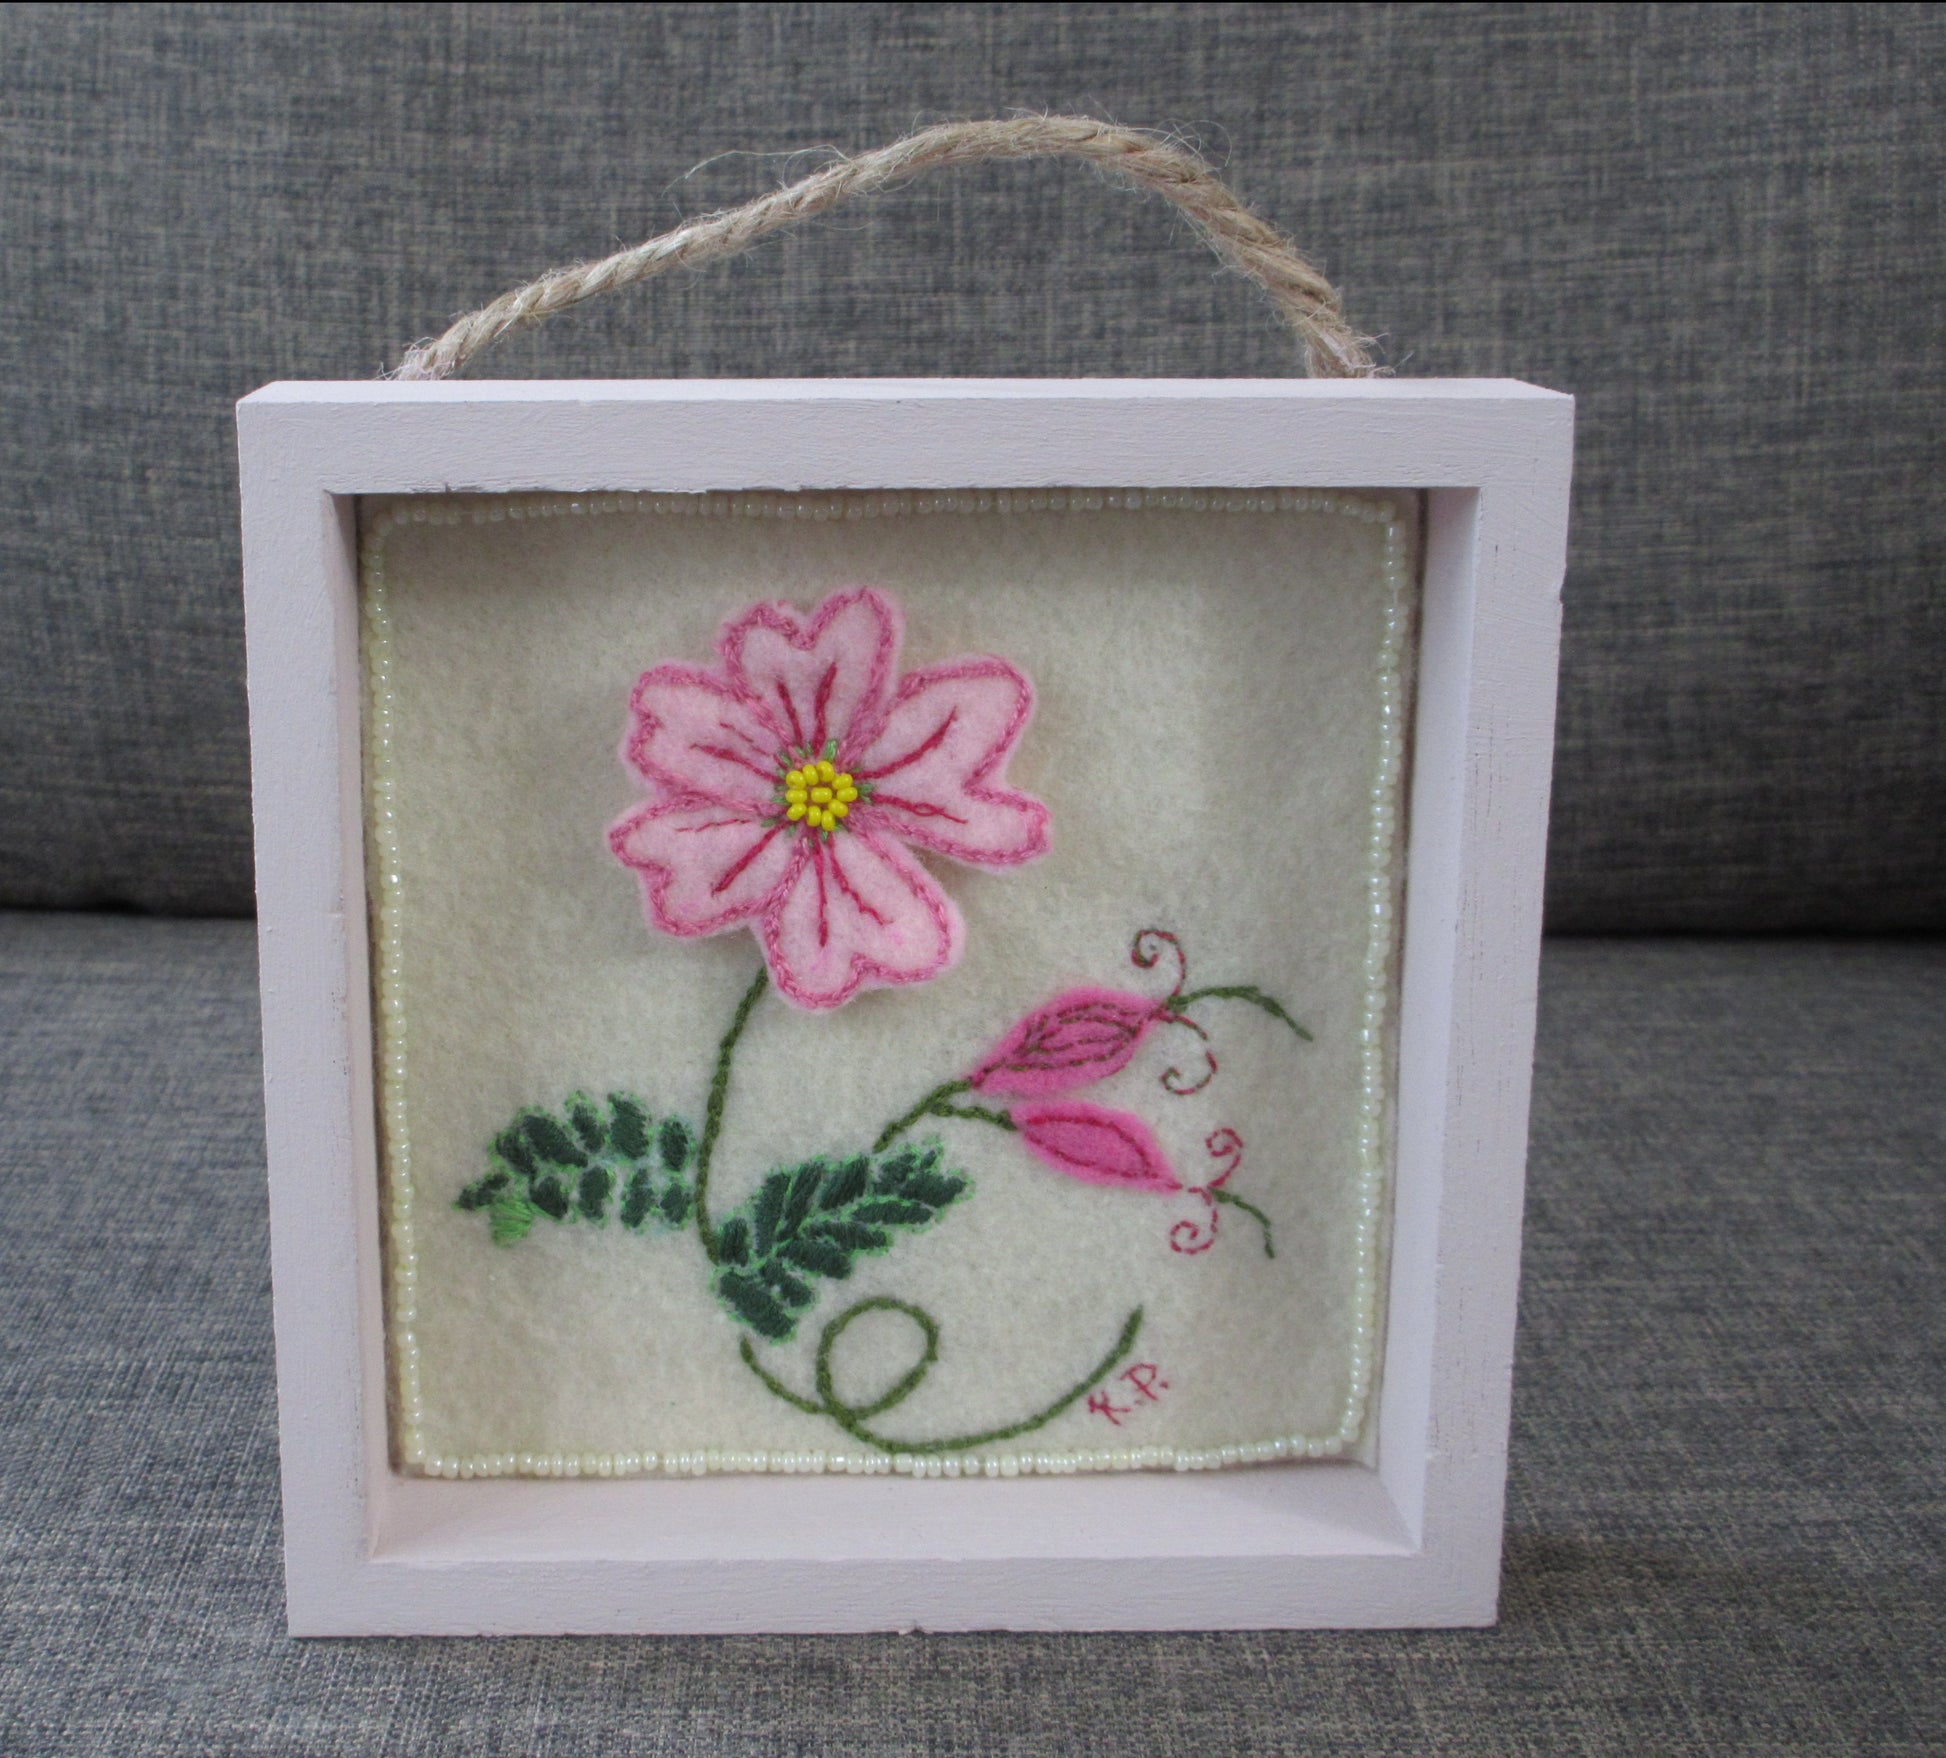 A pink flower with two buds.  The flower is on felt with hand details in hand embroidery. The flower center is beads. The piece is in a chalk pink wooden box frame with a rope hanger on top.  By artist Kathy Poitras.